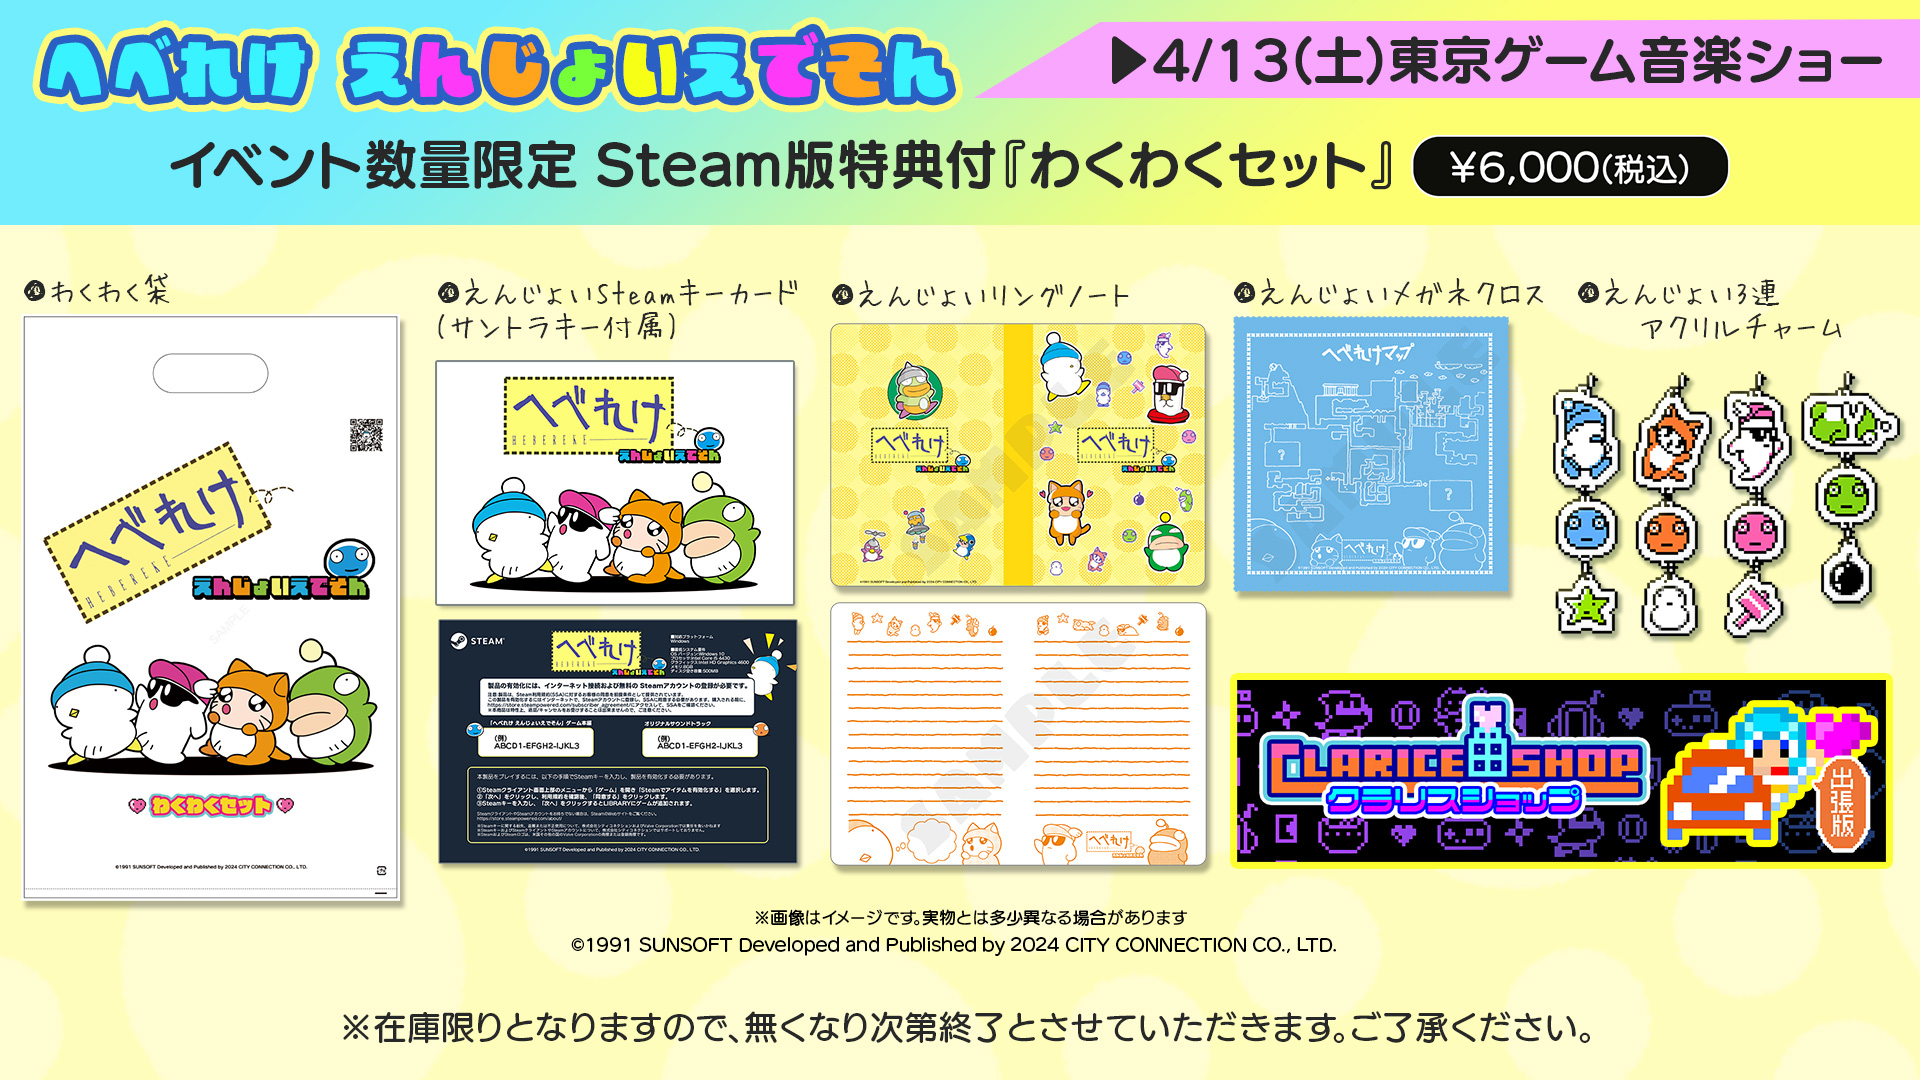 'Excited Set' with special offer for the Steam version